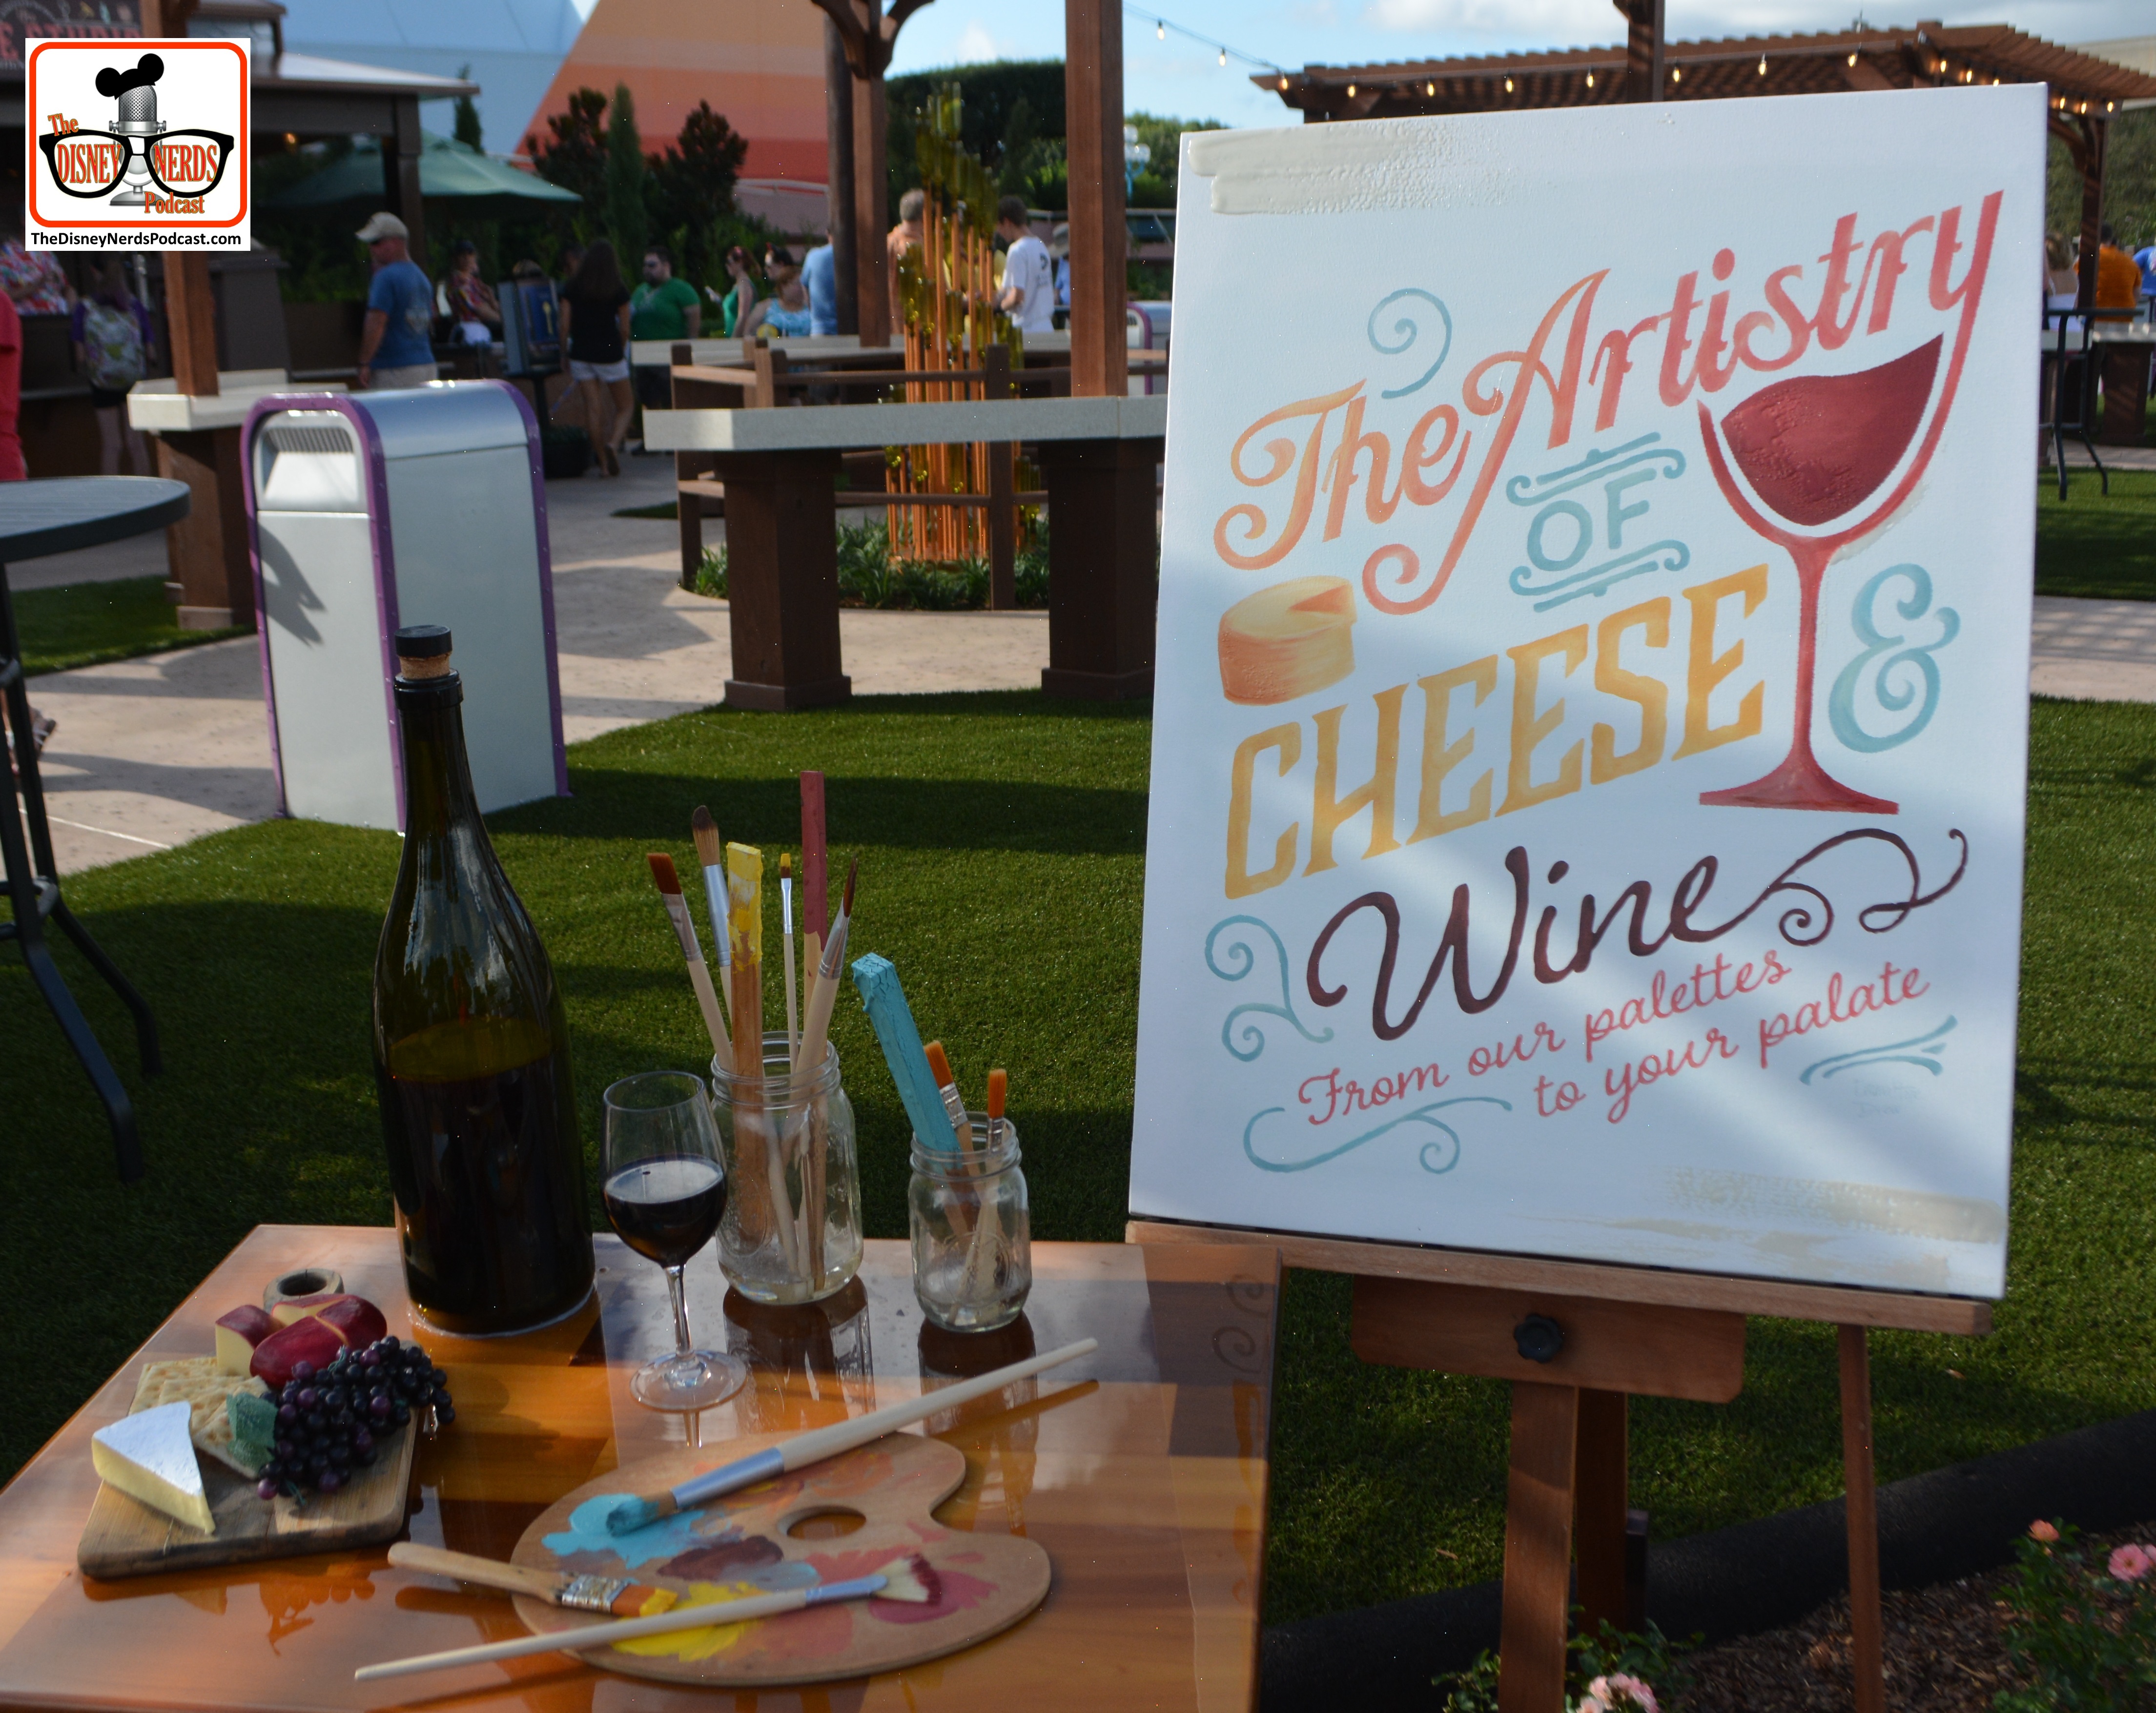 New for 2015 - The Artistry of Cheese and Wine - located on the walk way from Imagination to Canada